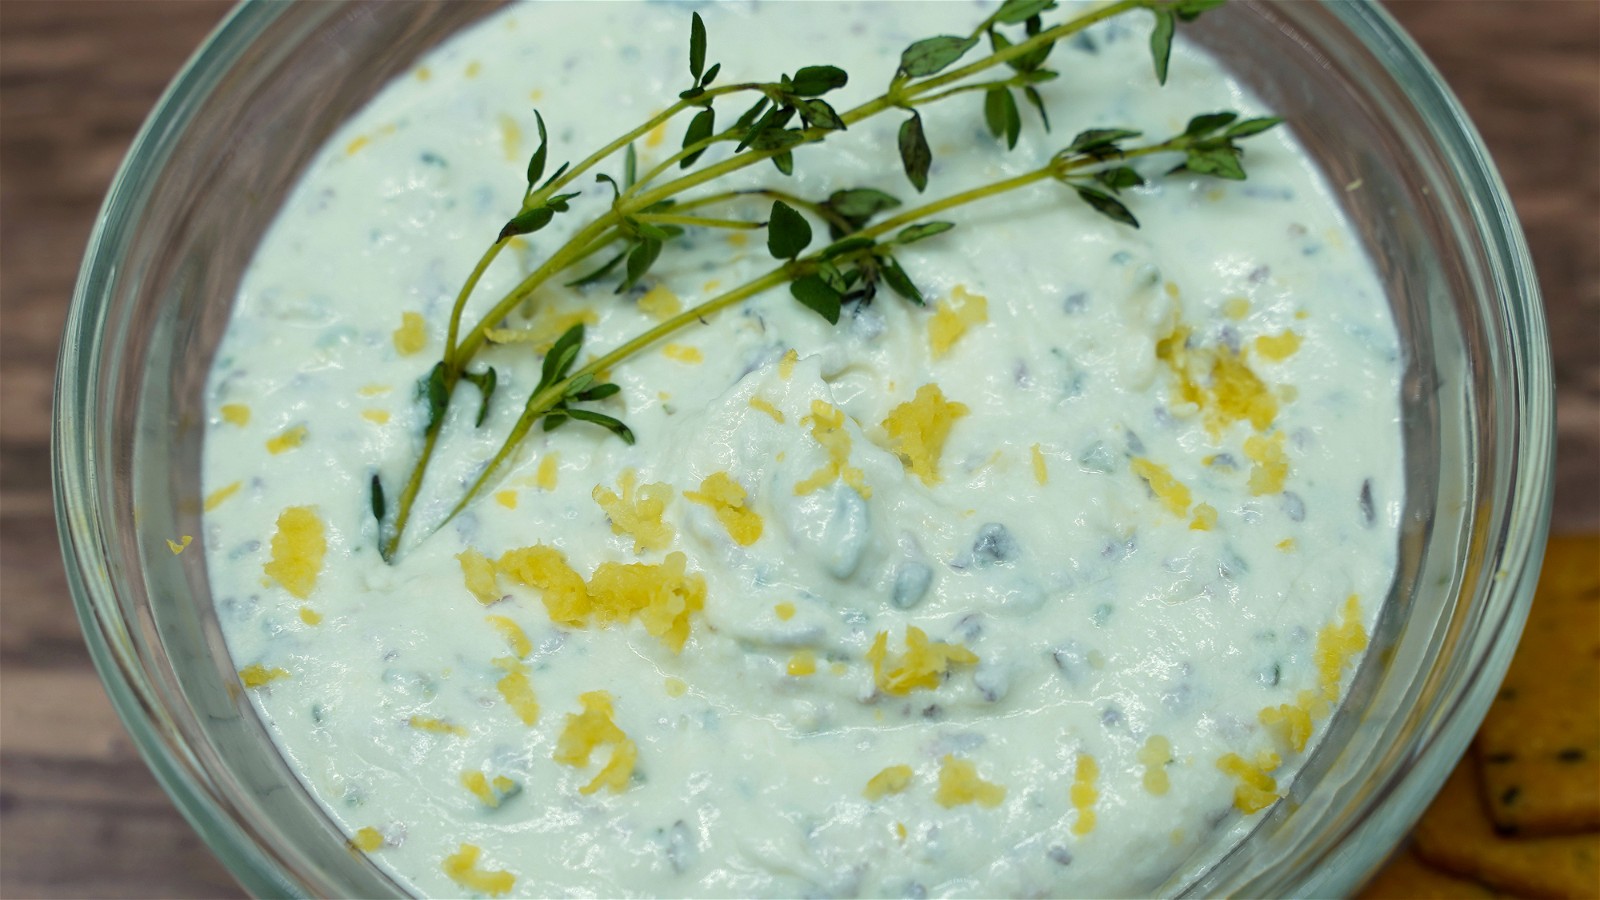 Image of Seaweed Goat Cheese Spread